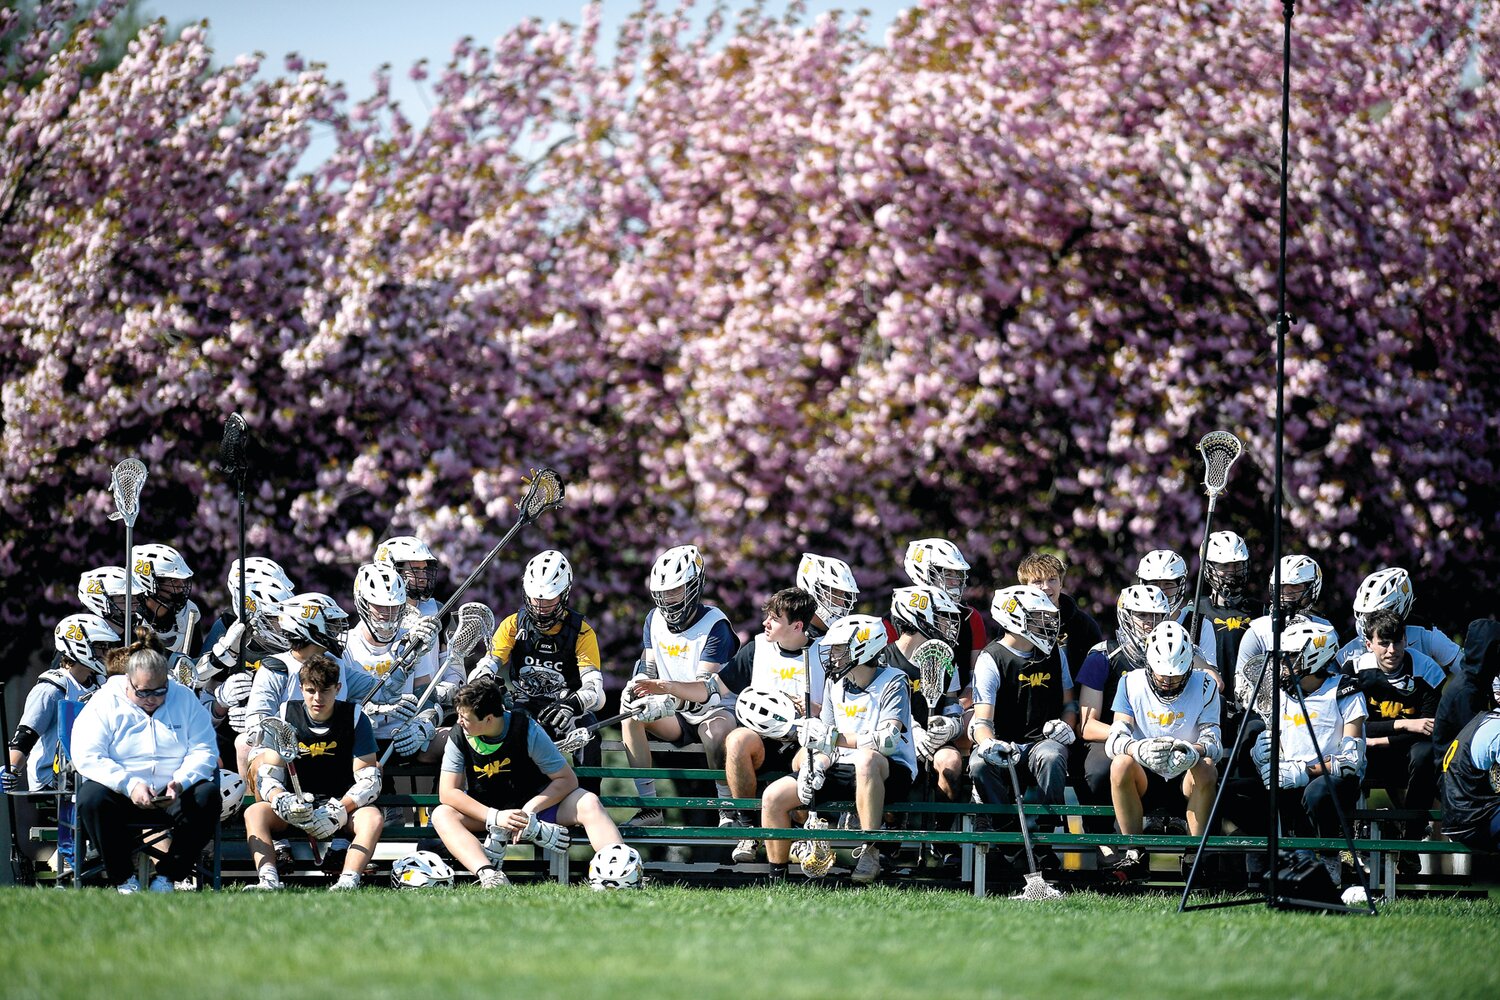 The Archbishop Wood boys lacrosse team comes out to support the girls team on Senior Day.